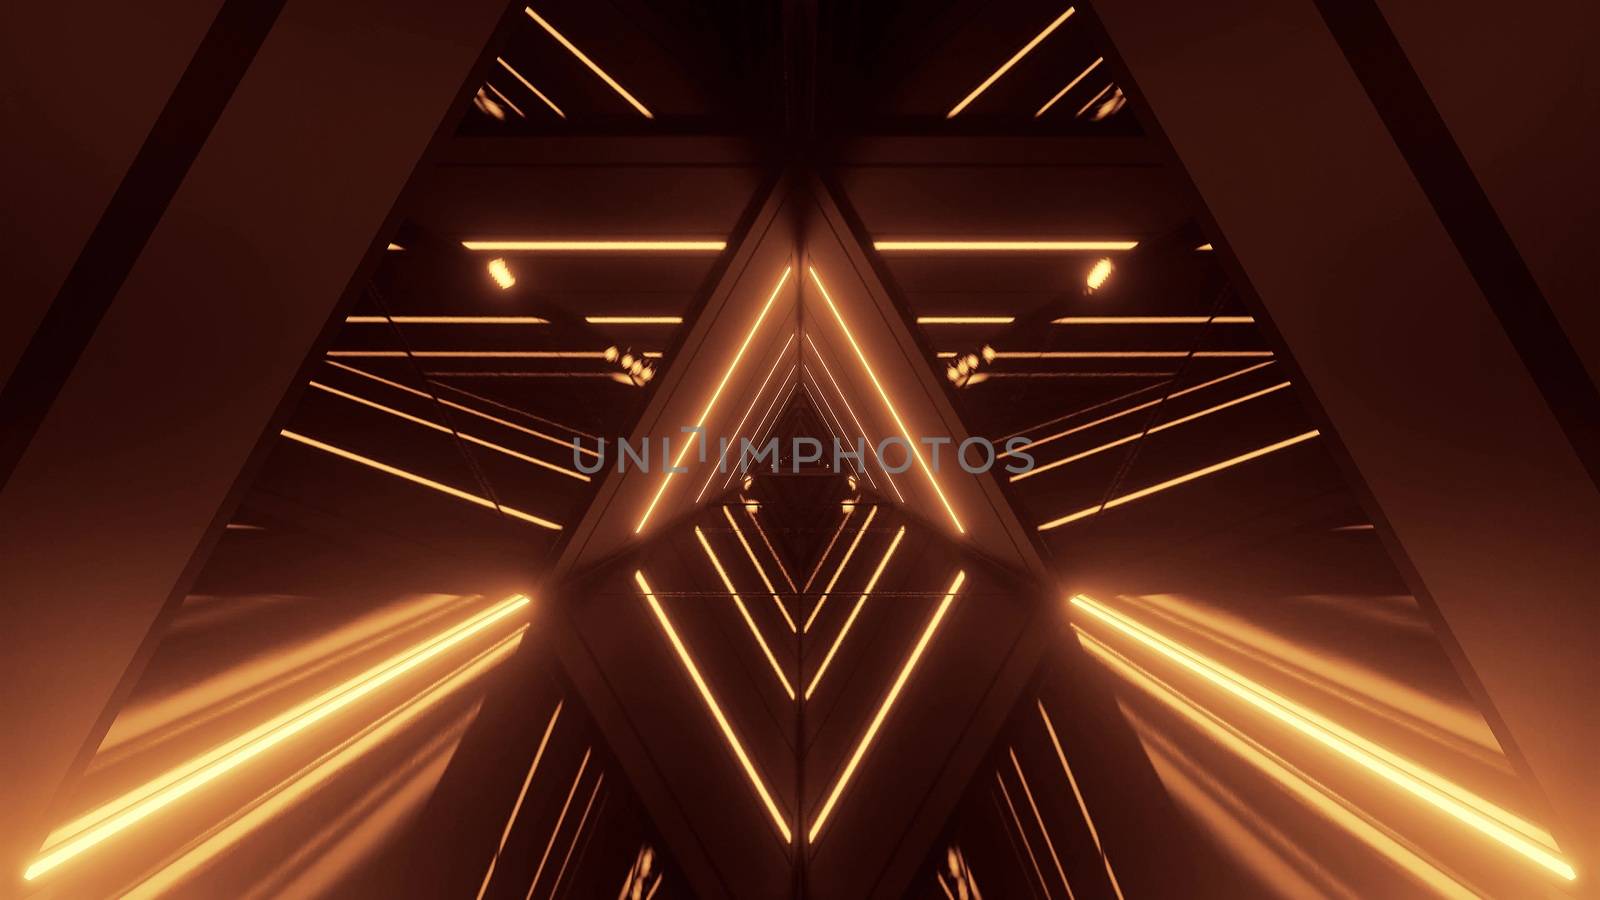 abstract dark glowing triangle graphic design artwork with reflective wet water or glass bottom 3d illustration background wallpaper, triangle alien space ship tunnel corridor 3d rendering design